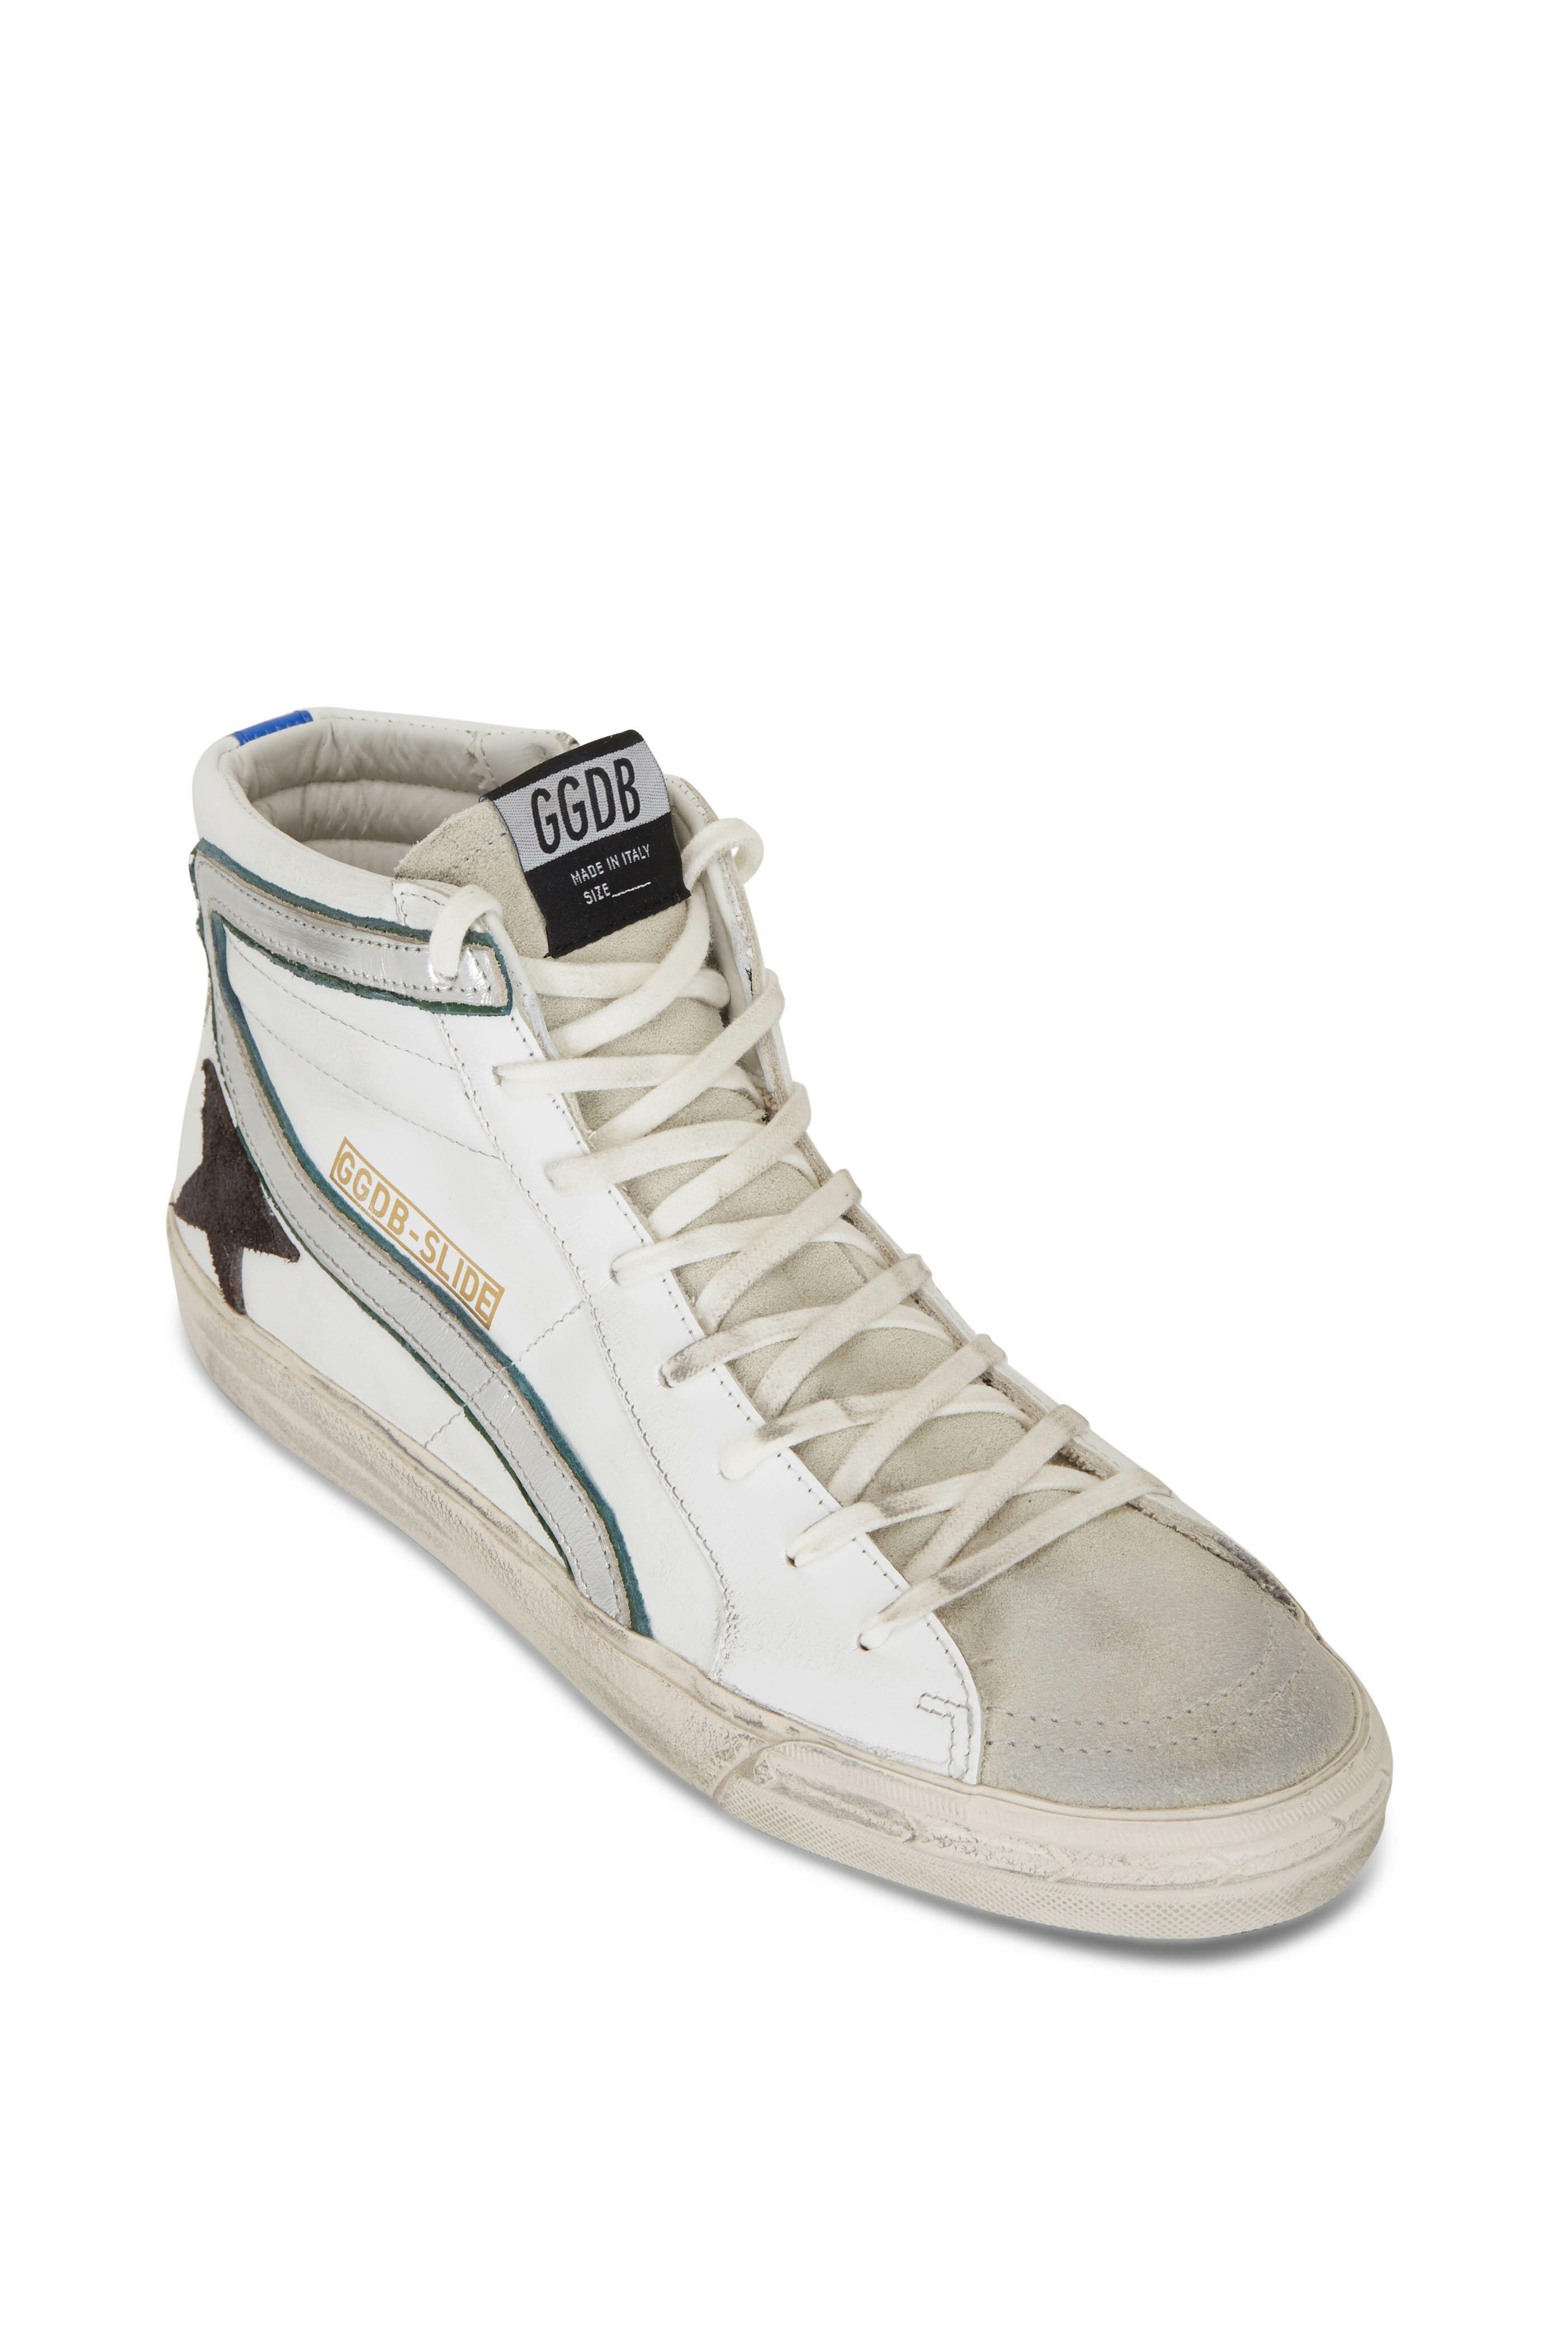 Goose - Slide White Leather High-Top